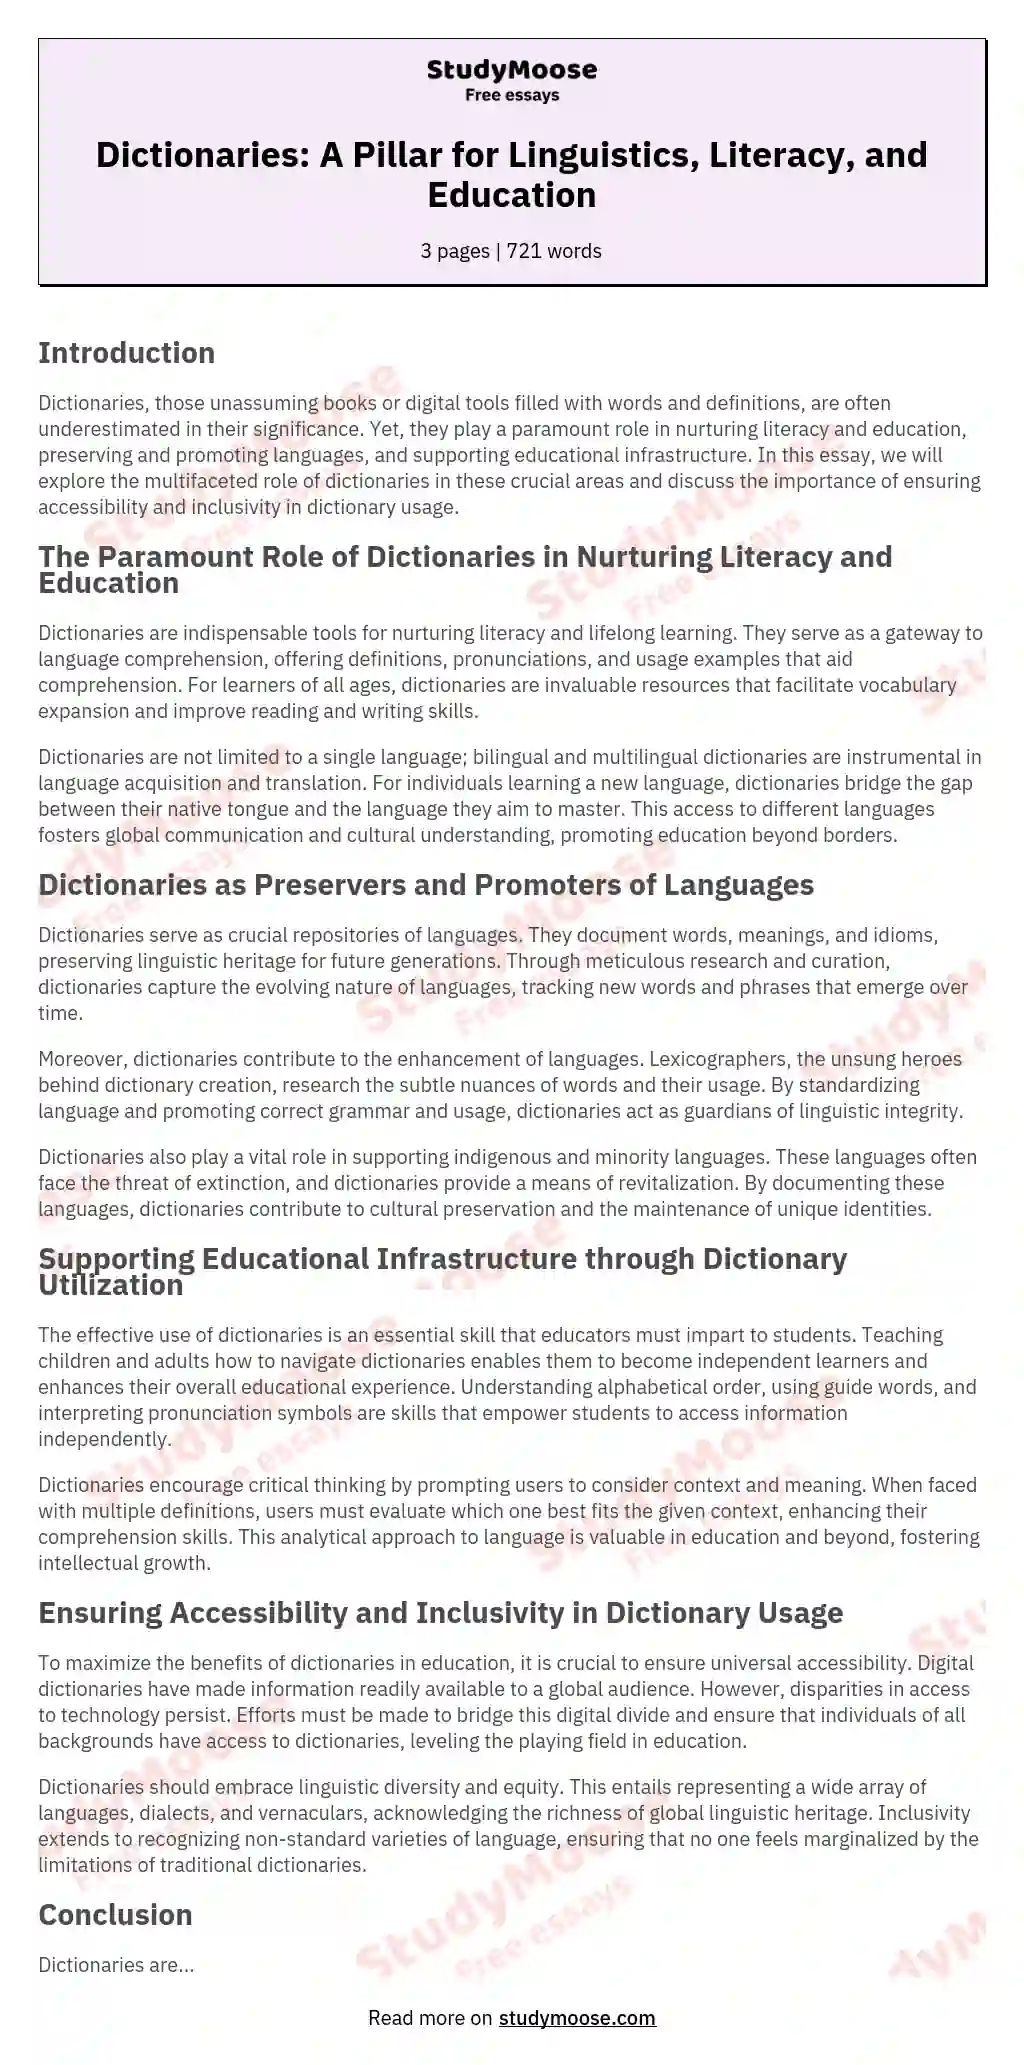 Dictionaries: A Pillar for Linguistics, Literacy, and Education essay